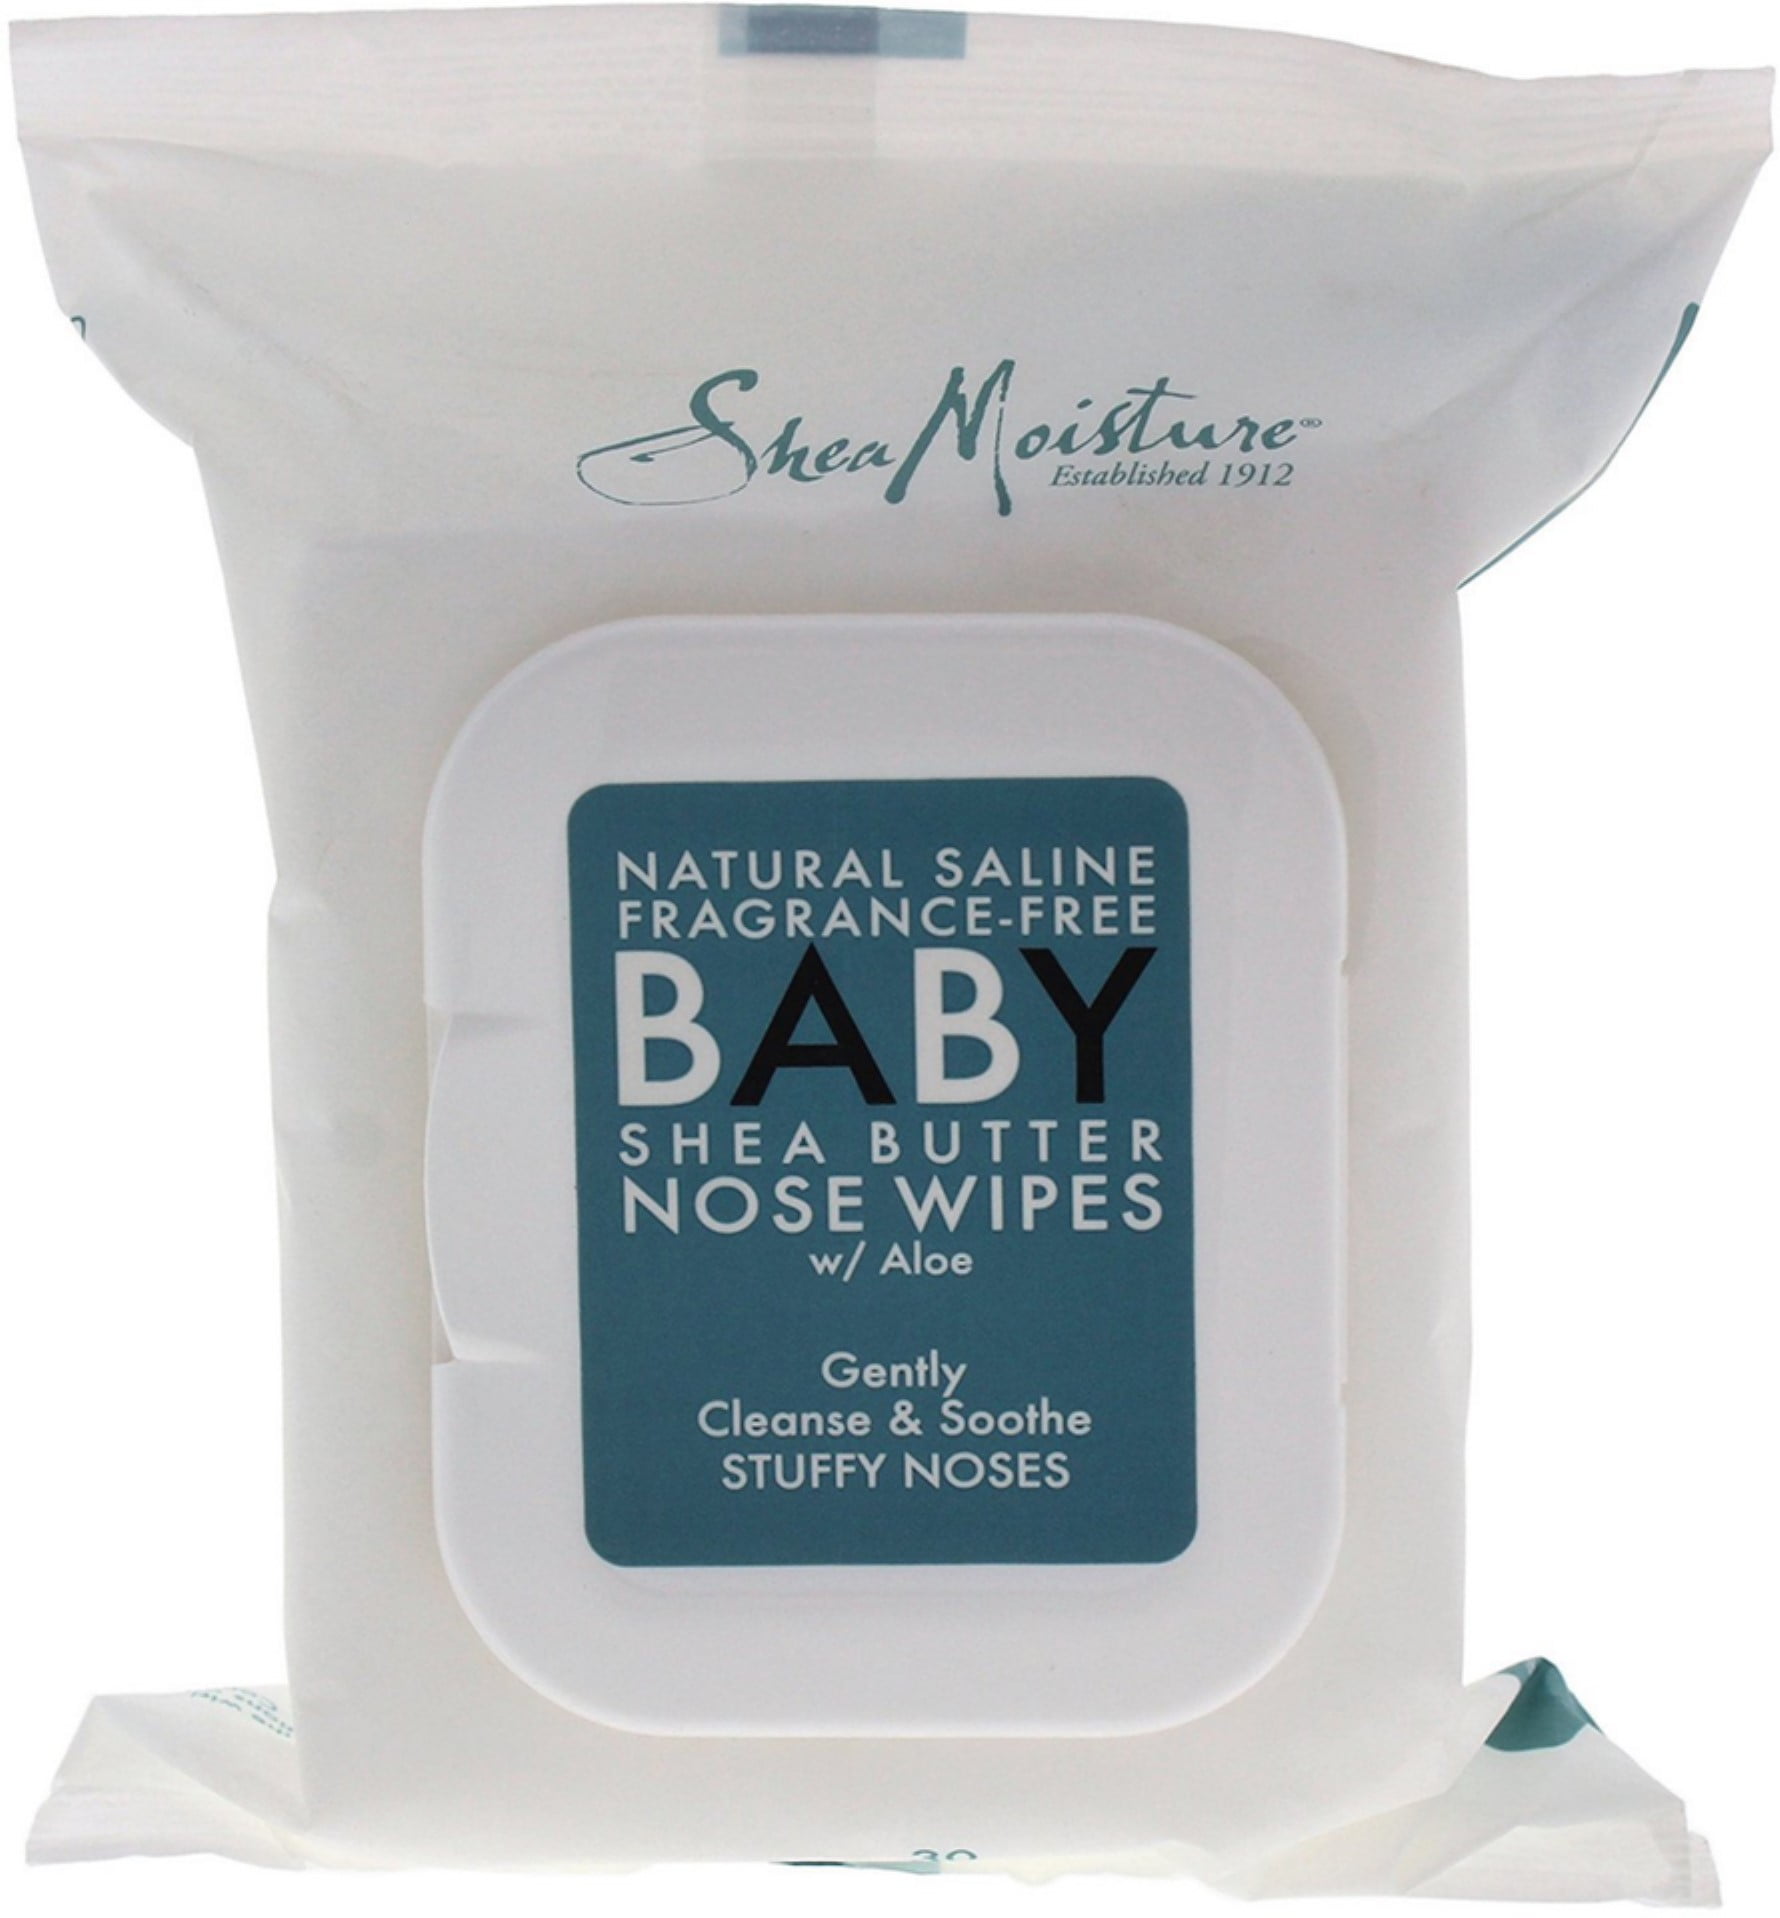 Shea Moisture Natural Saline Fragrance-Free Baby Butter Nose Wipes for Kids 30 ea (Pack of 2)